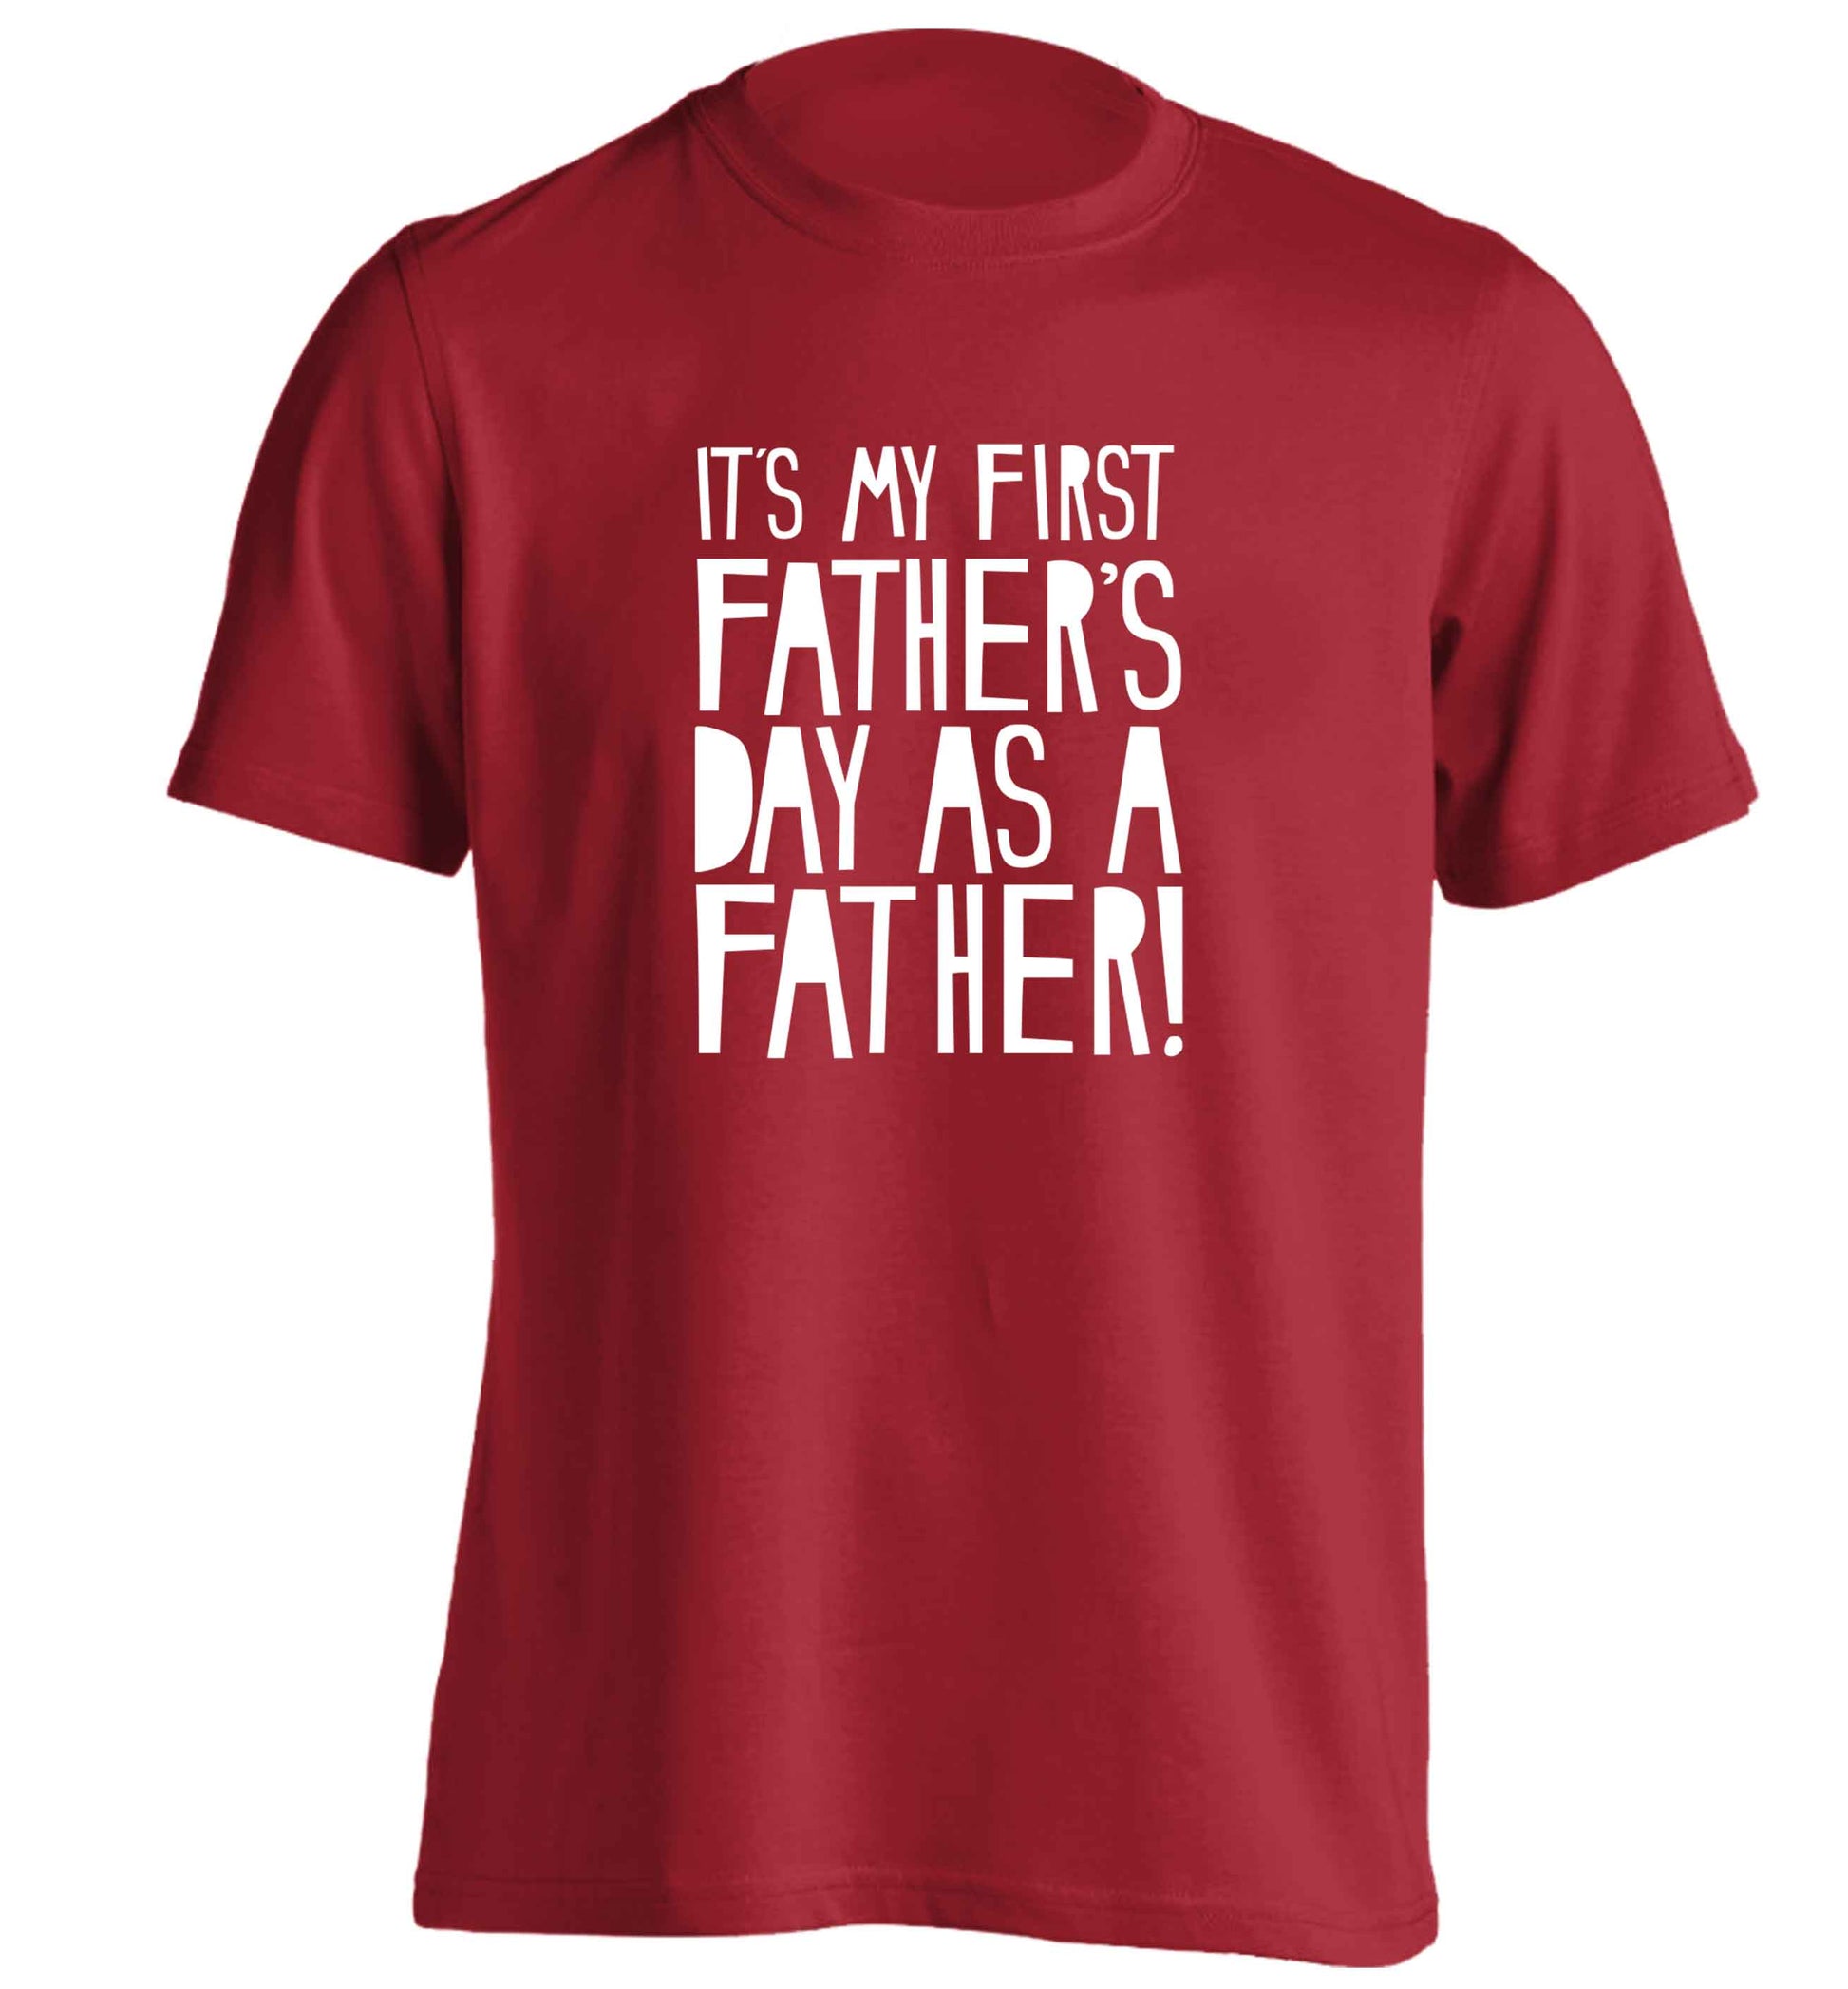 It's my first father's day as a father! adults unisex red Tshirt 2XL